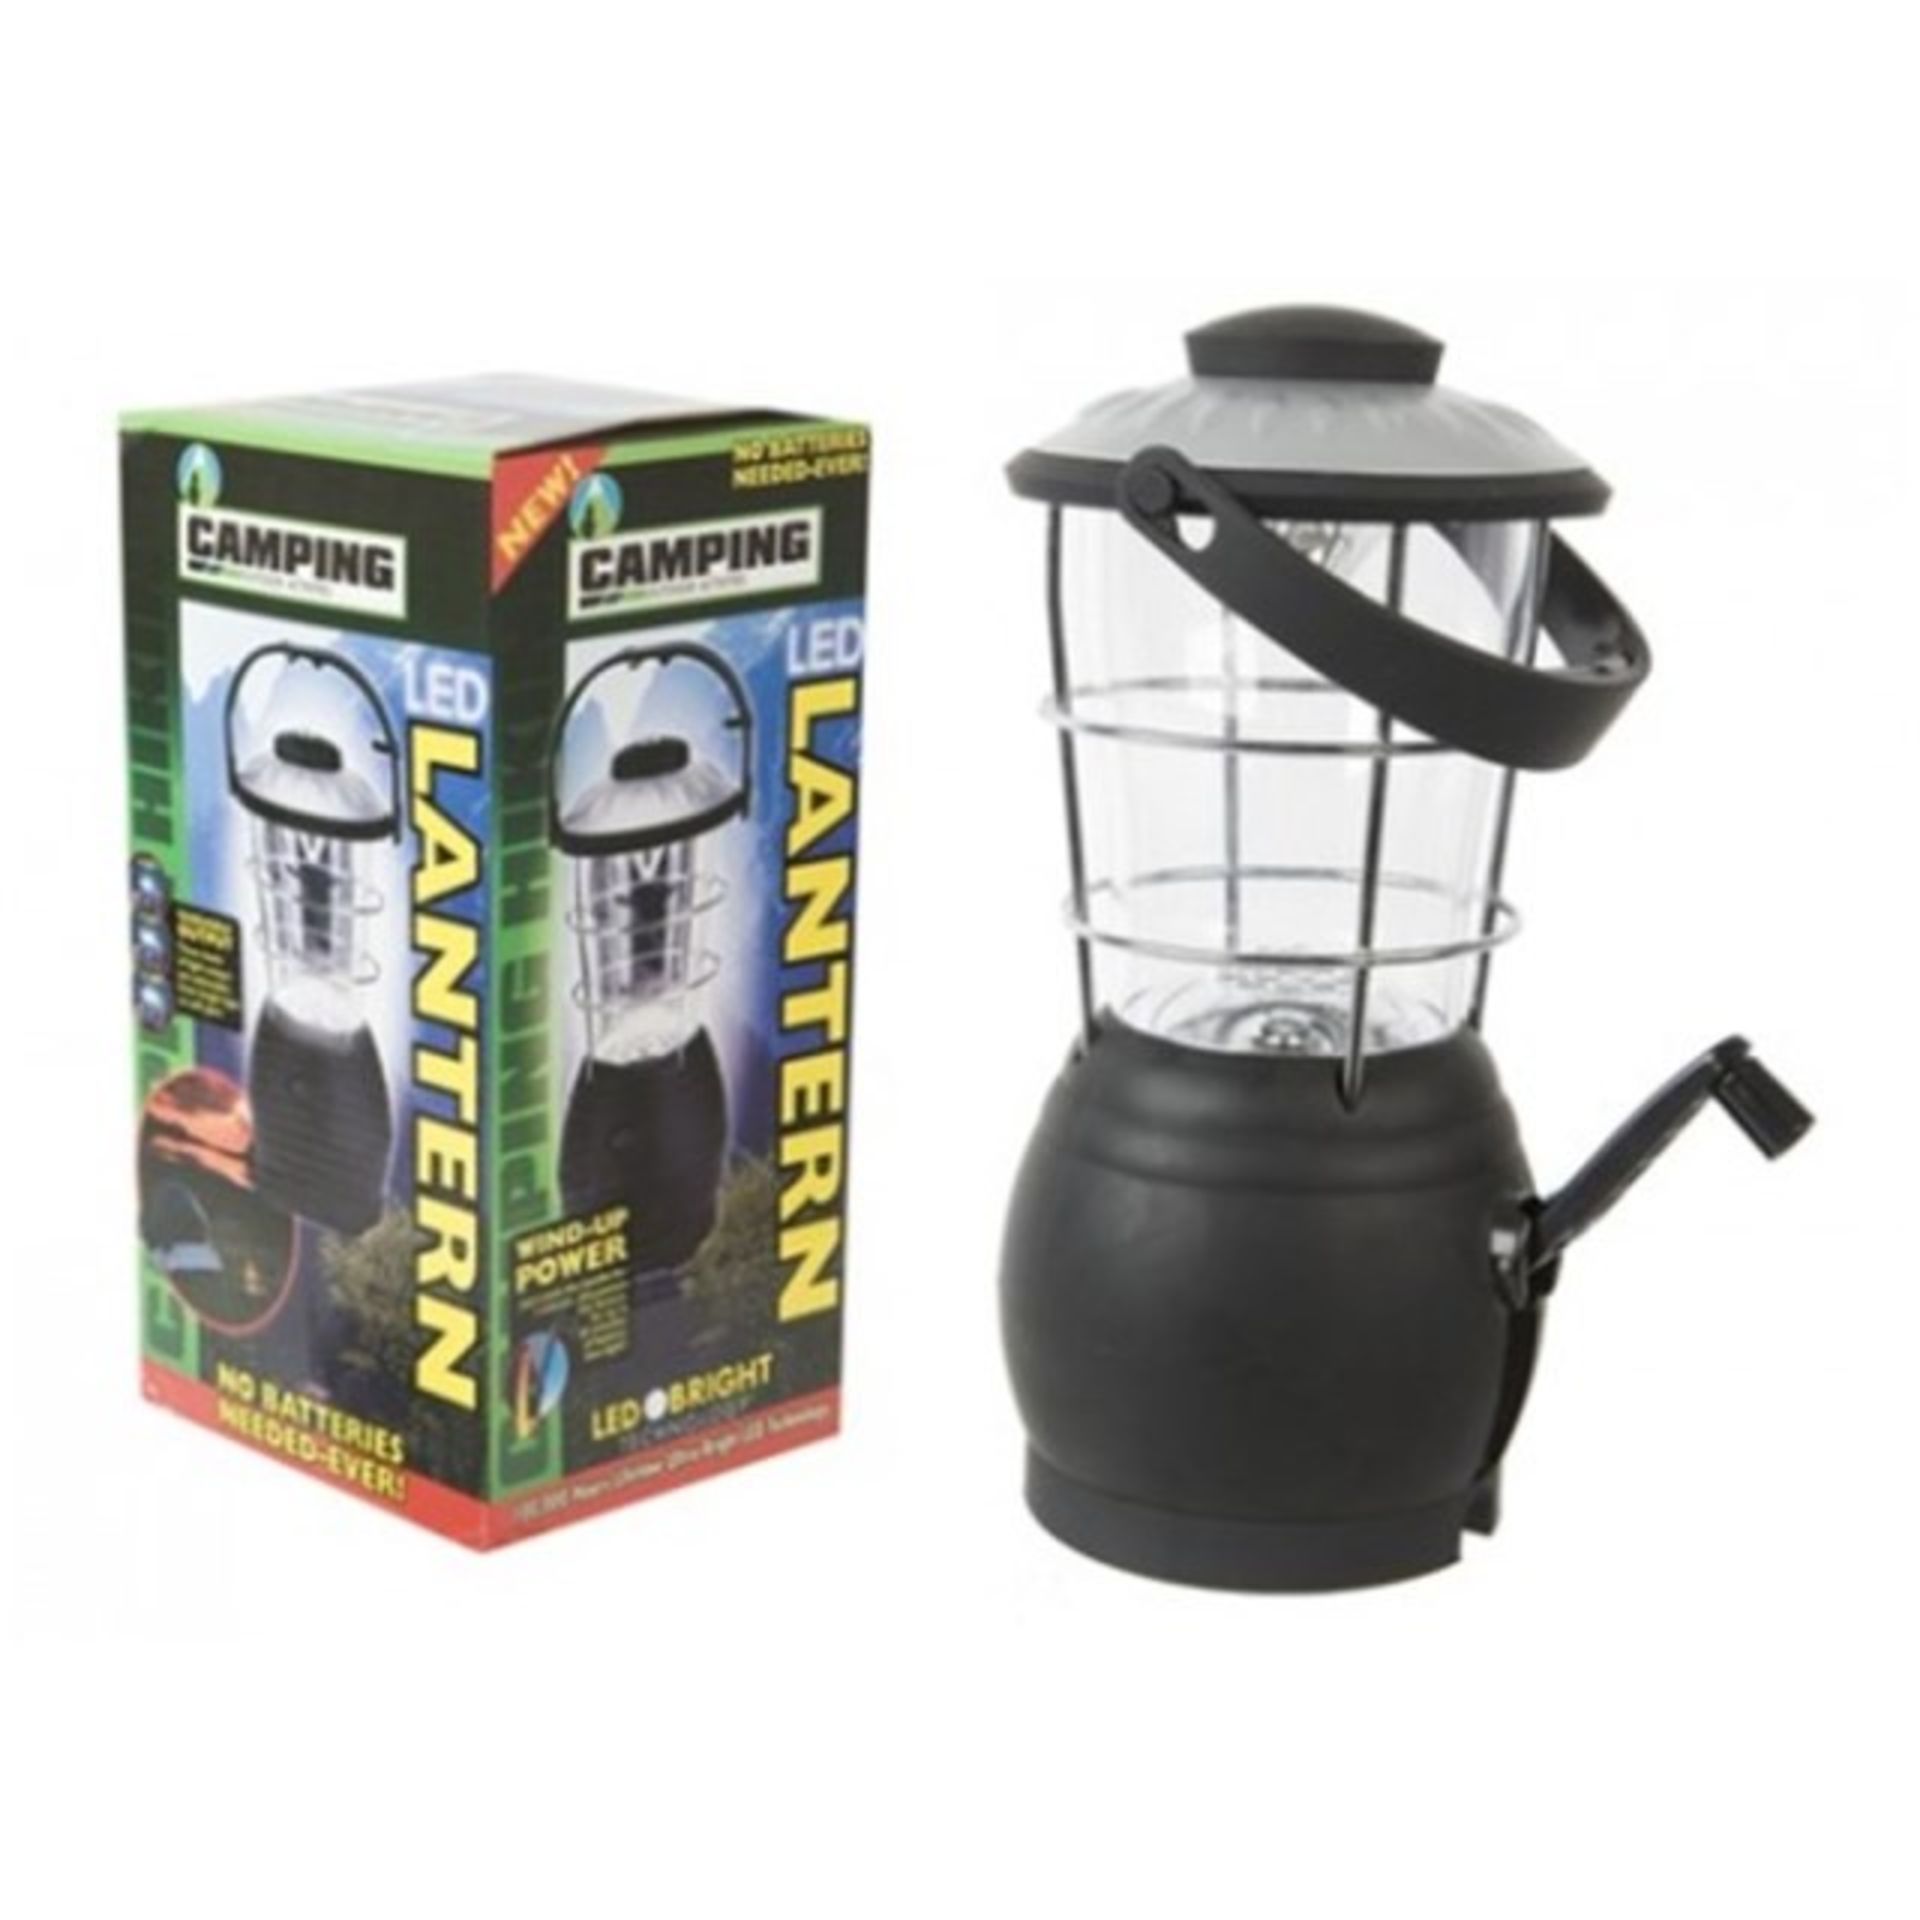 V *TRADE QTY* Brand New 12 LED Wind Up Camping Lantern In Box RRP24.99 X 4 YOUR BID PRICE TO BE